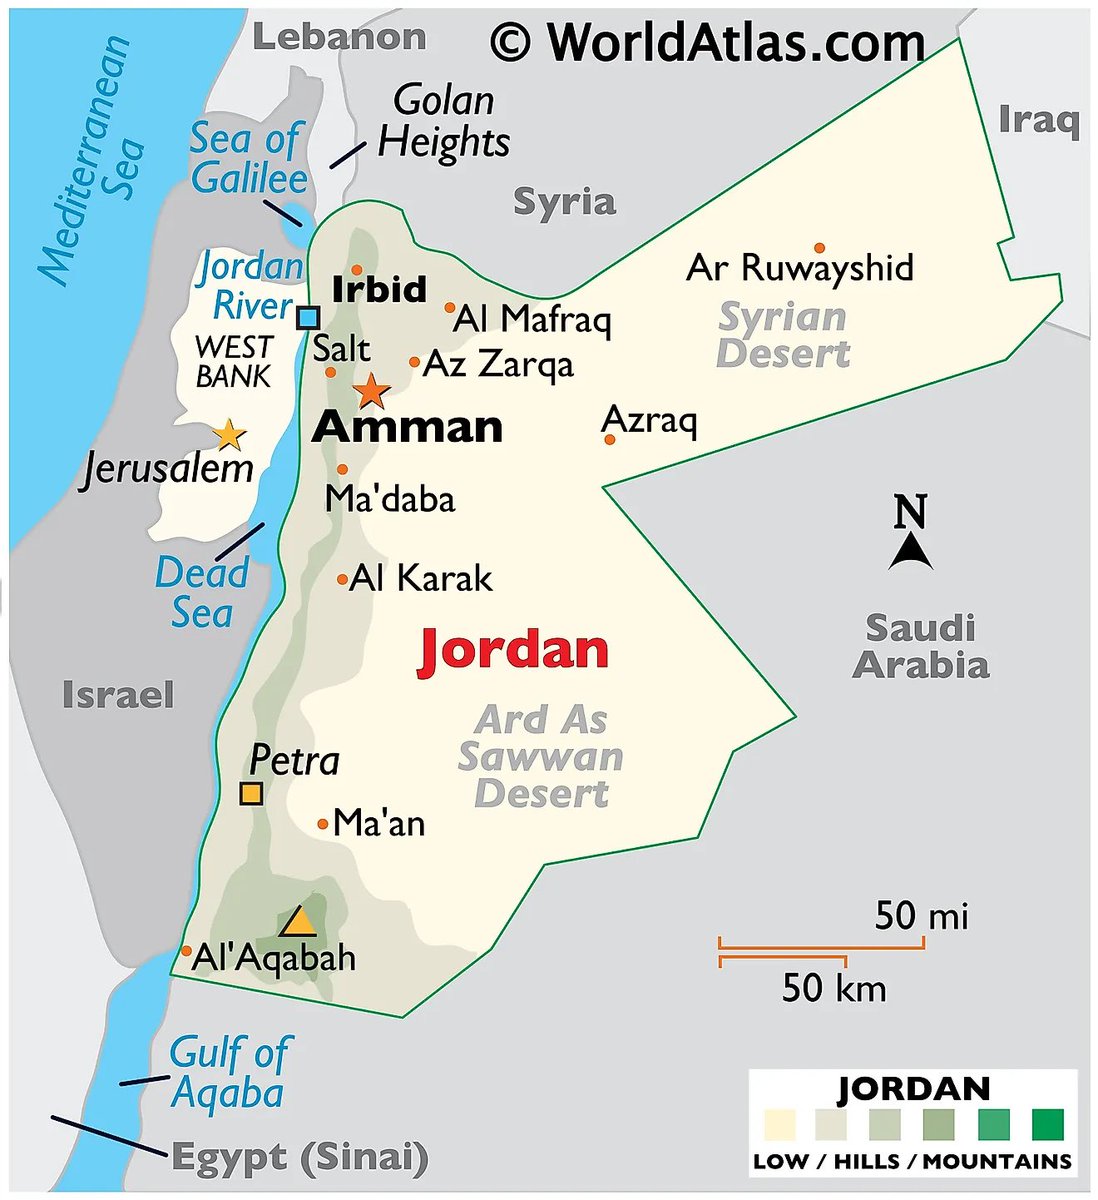 BREAKING: Jordan opens up airspace to Israeli fighter jets to shoot down Iranian suicide drones